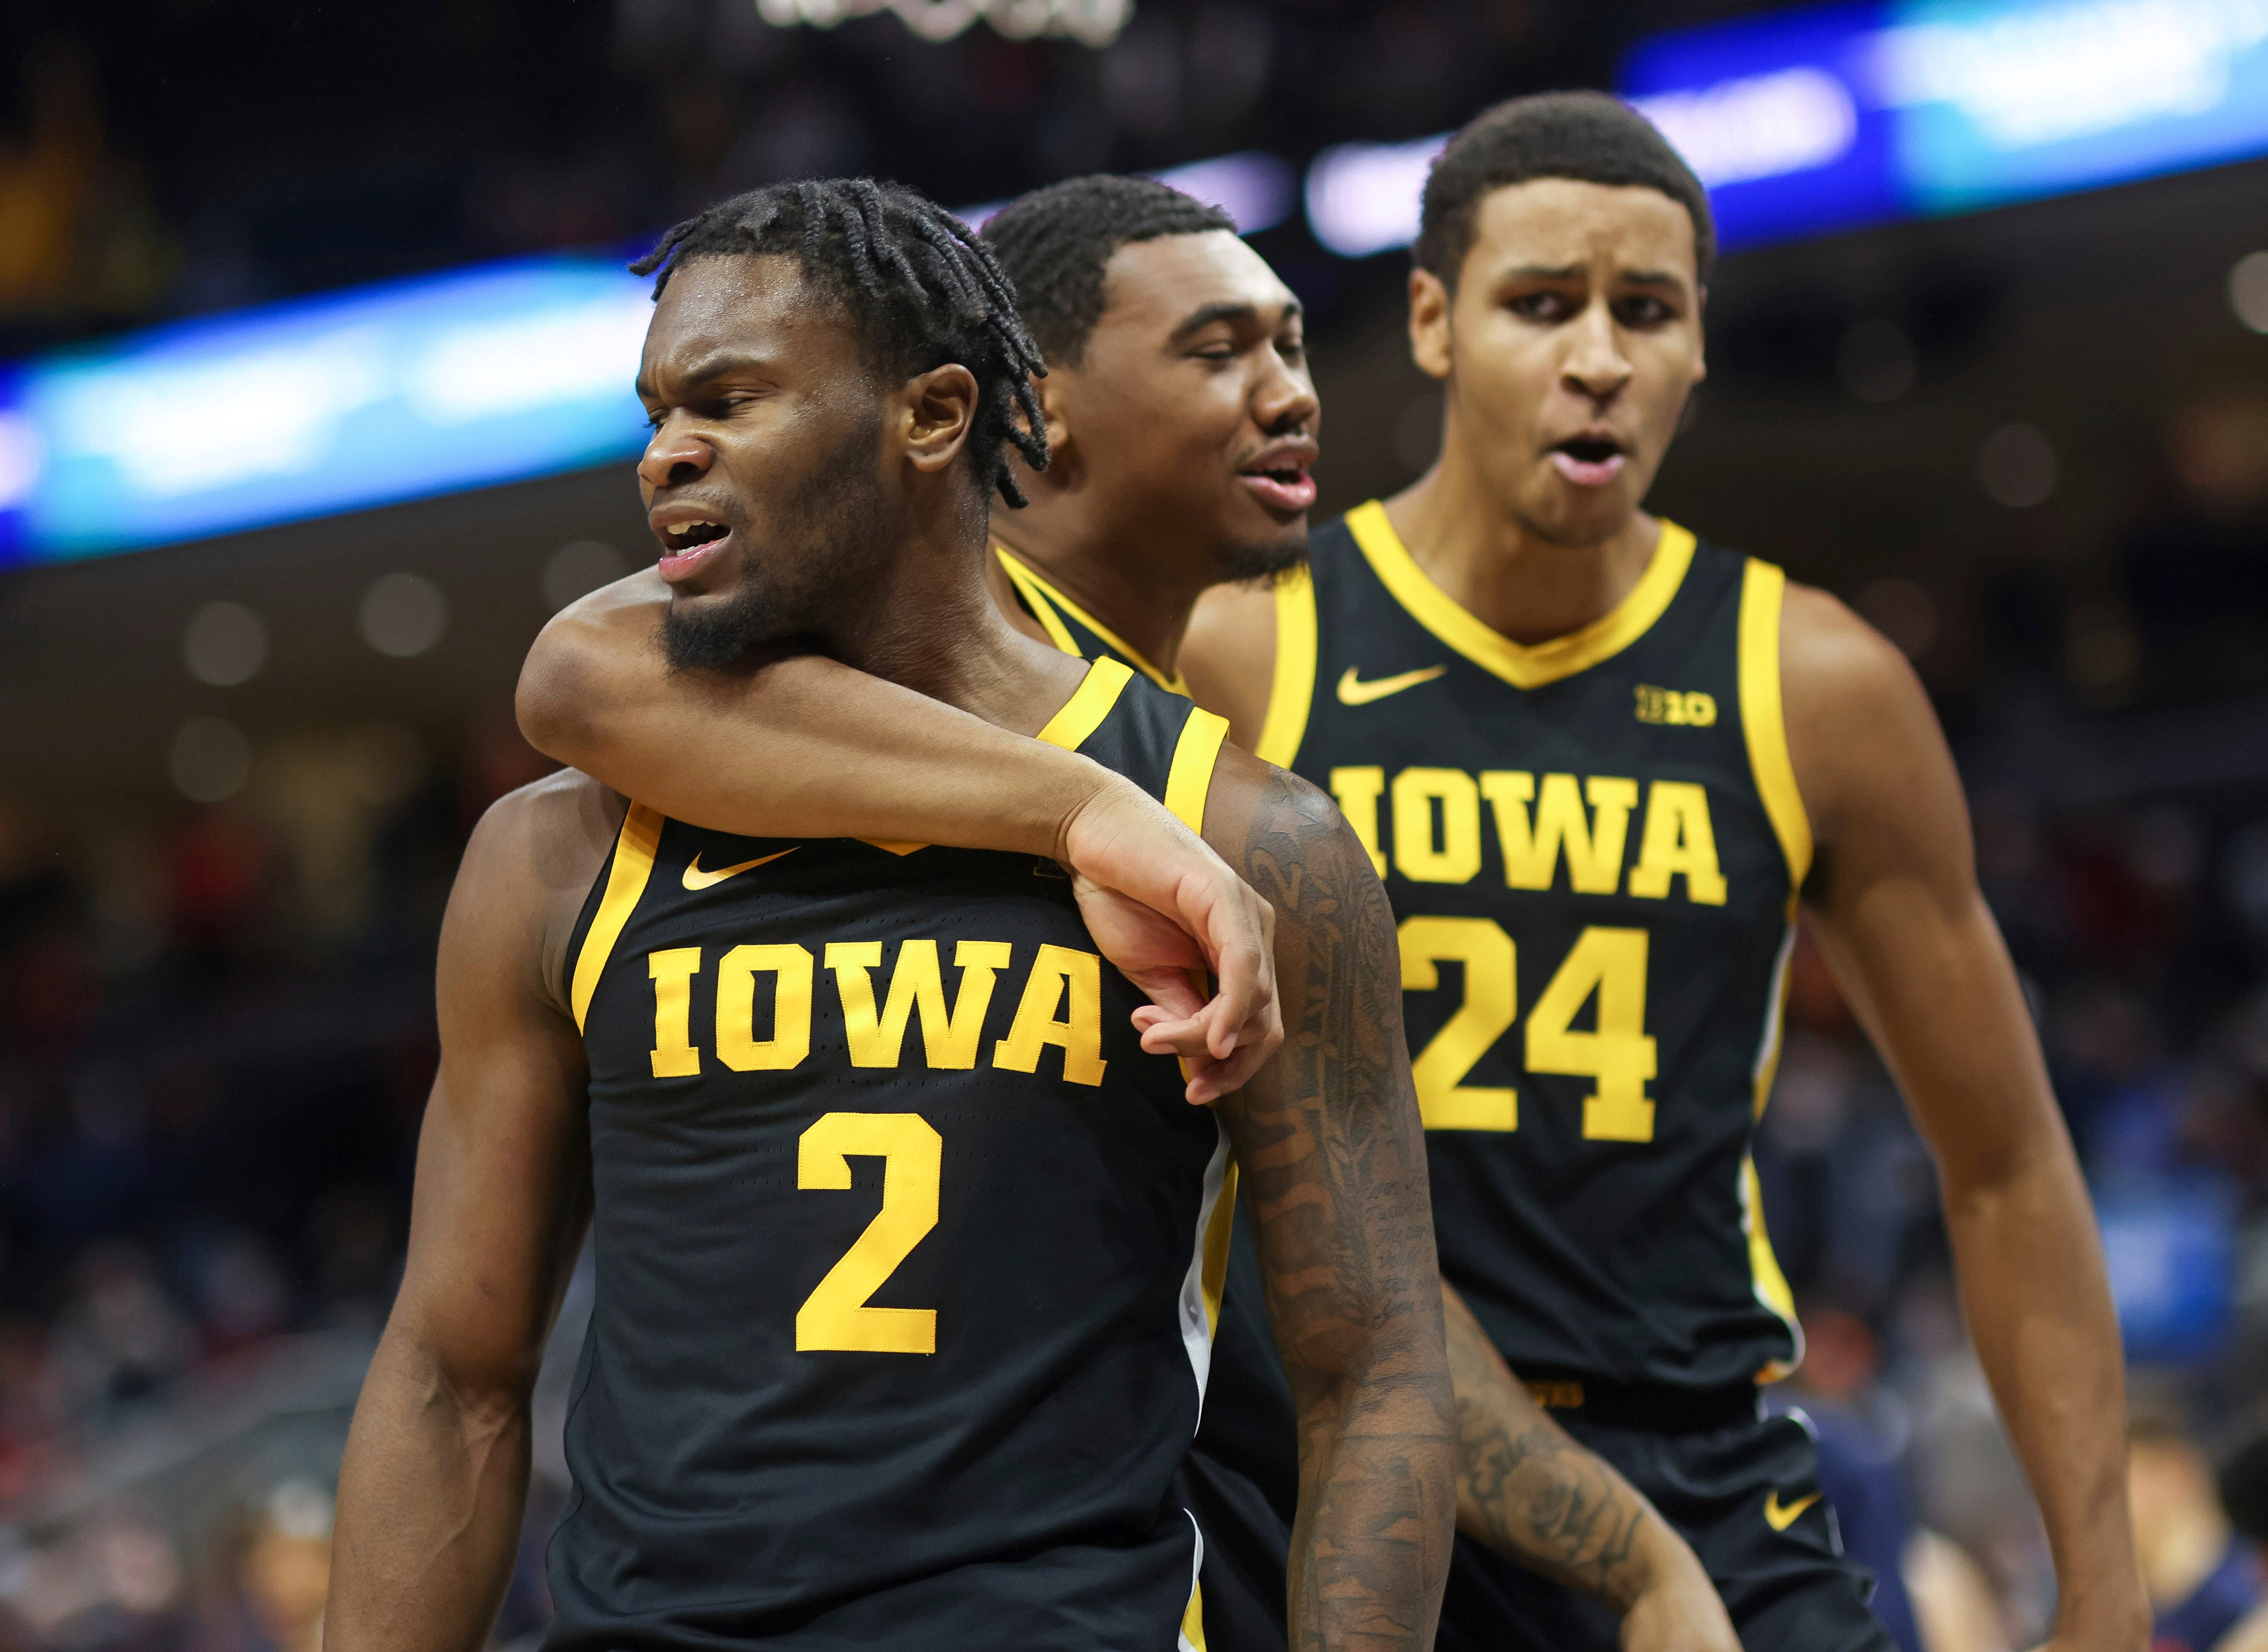 Iowa guard Joe Toussaint (2) celebrates the win over Virginia with teammates Tony Perkins (11) and Kris Murray (24) after an NCAA college basketball game, Monday, Nov. 29, 2021, in Charlottesville, Va.